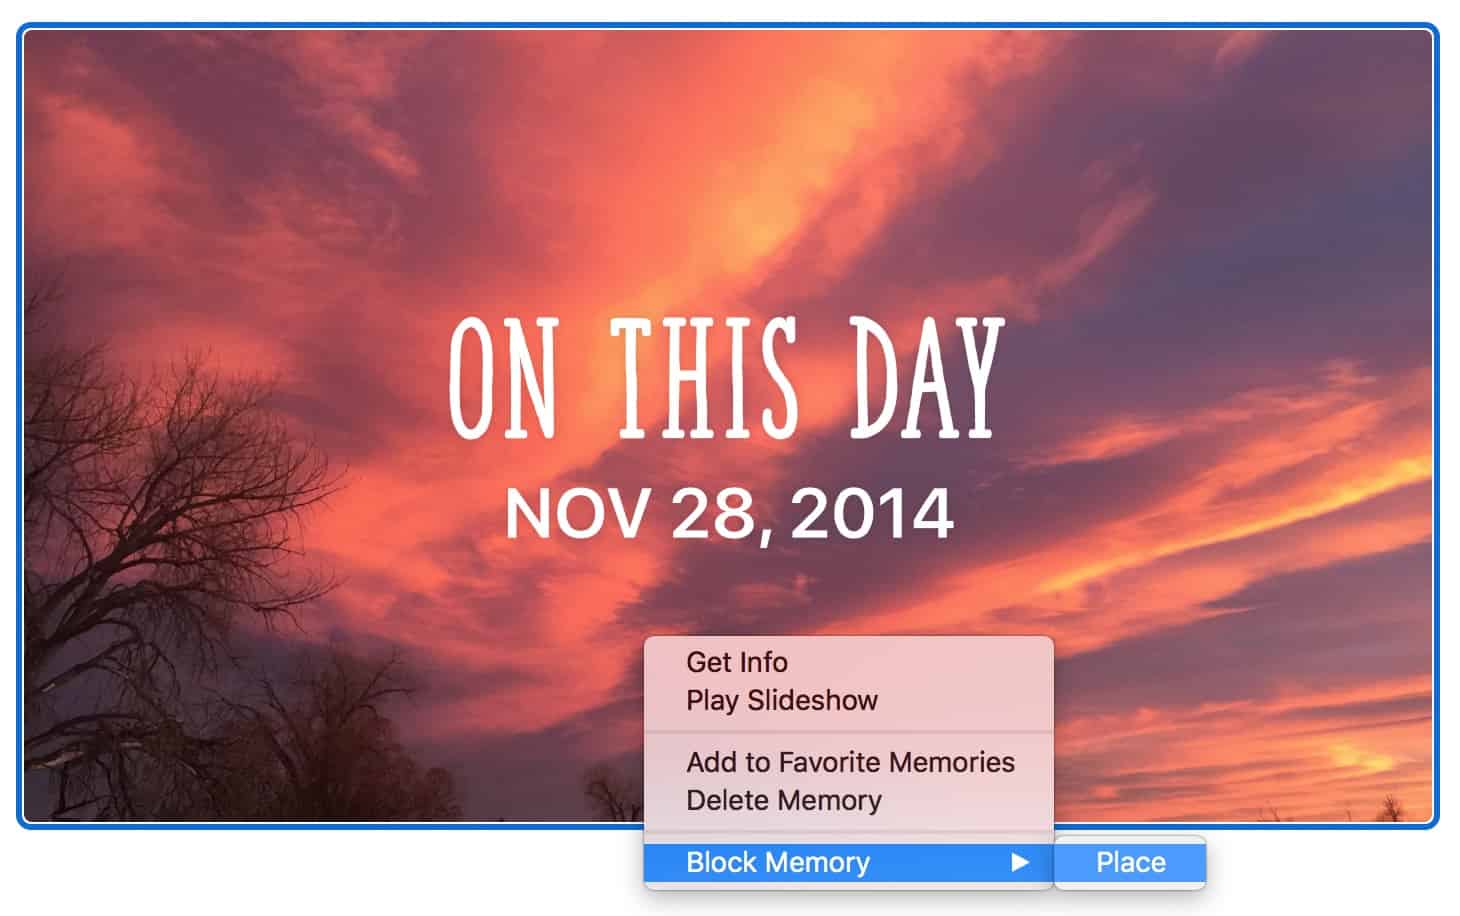 Block Memory of Place option in "On This Day" Memory collection in Photos on Mac